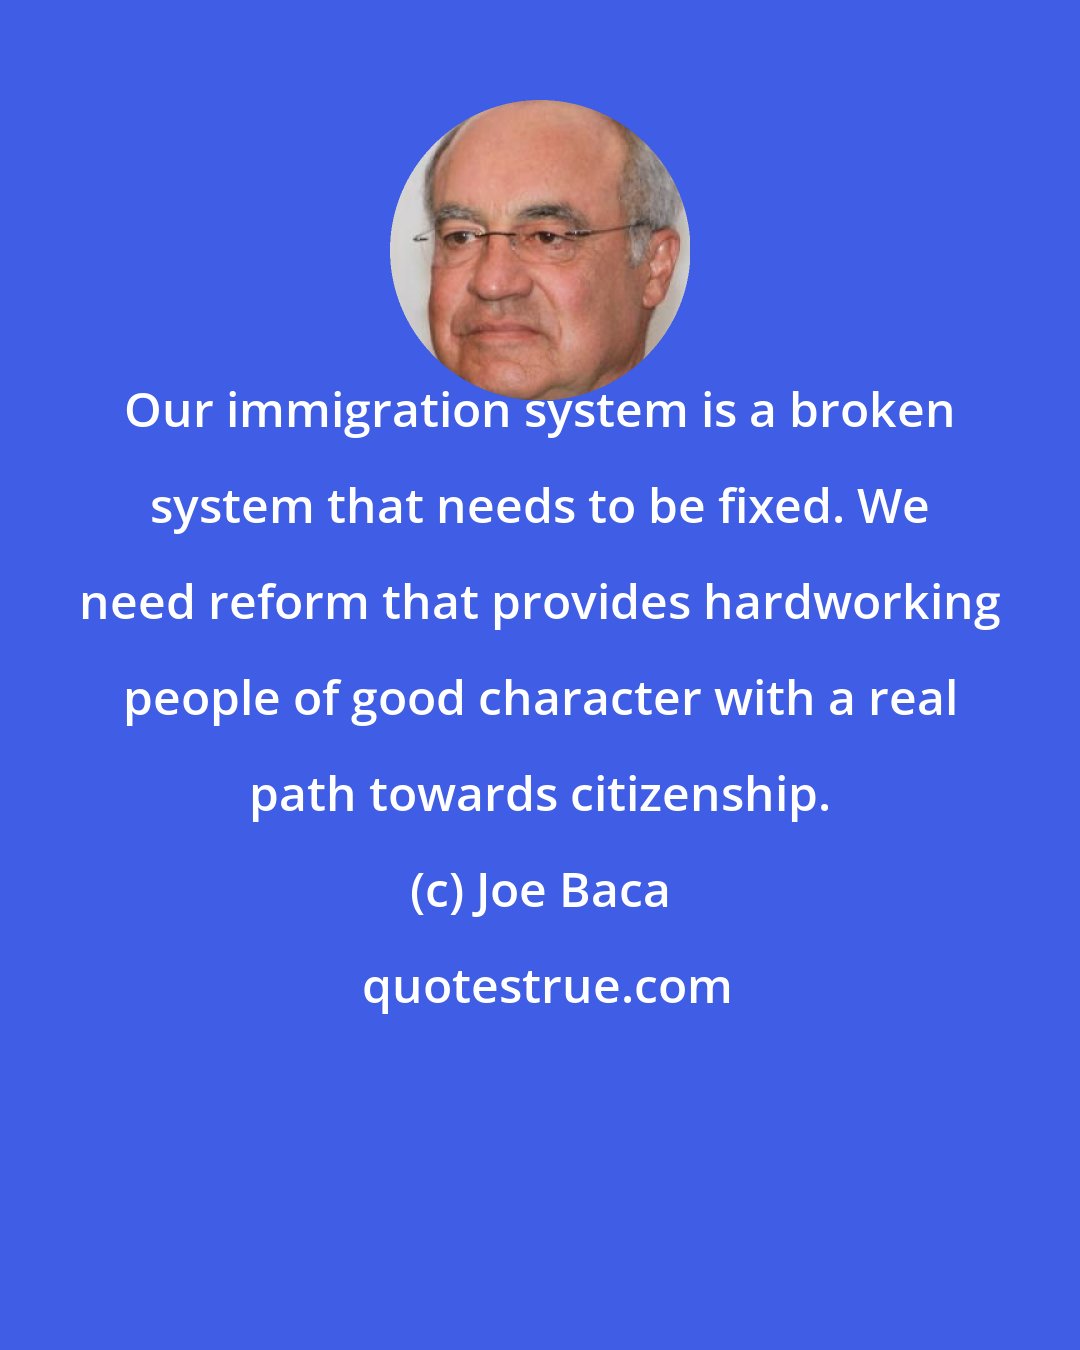 Joe Baca: Our immigration system is a broken system that needs to be fixed. We need reform that provides hardworking people of good character with a real path towards citizenship.